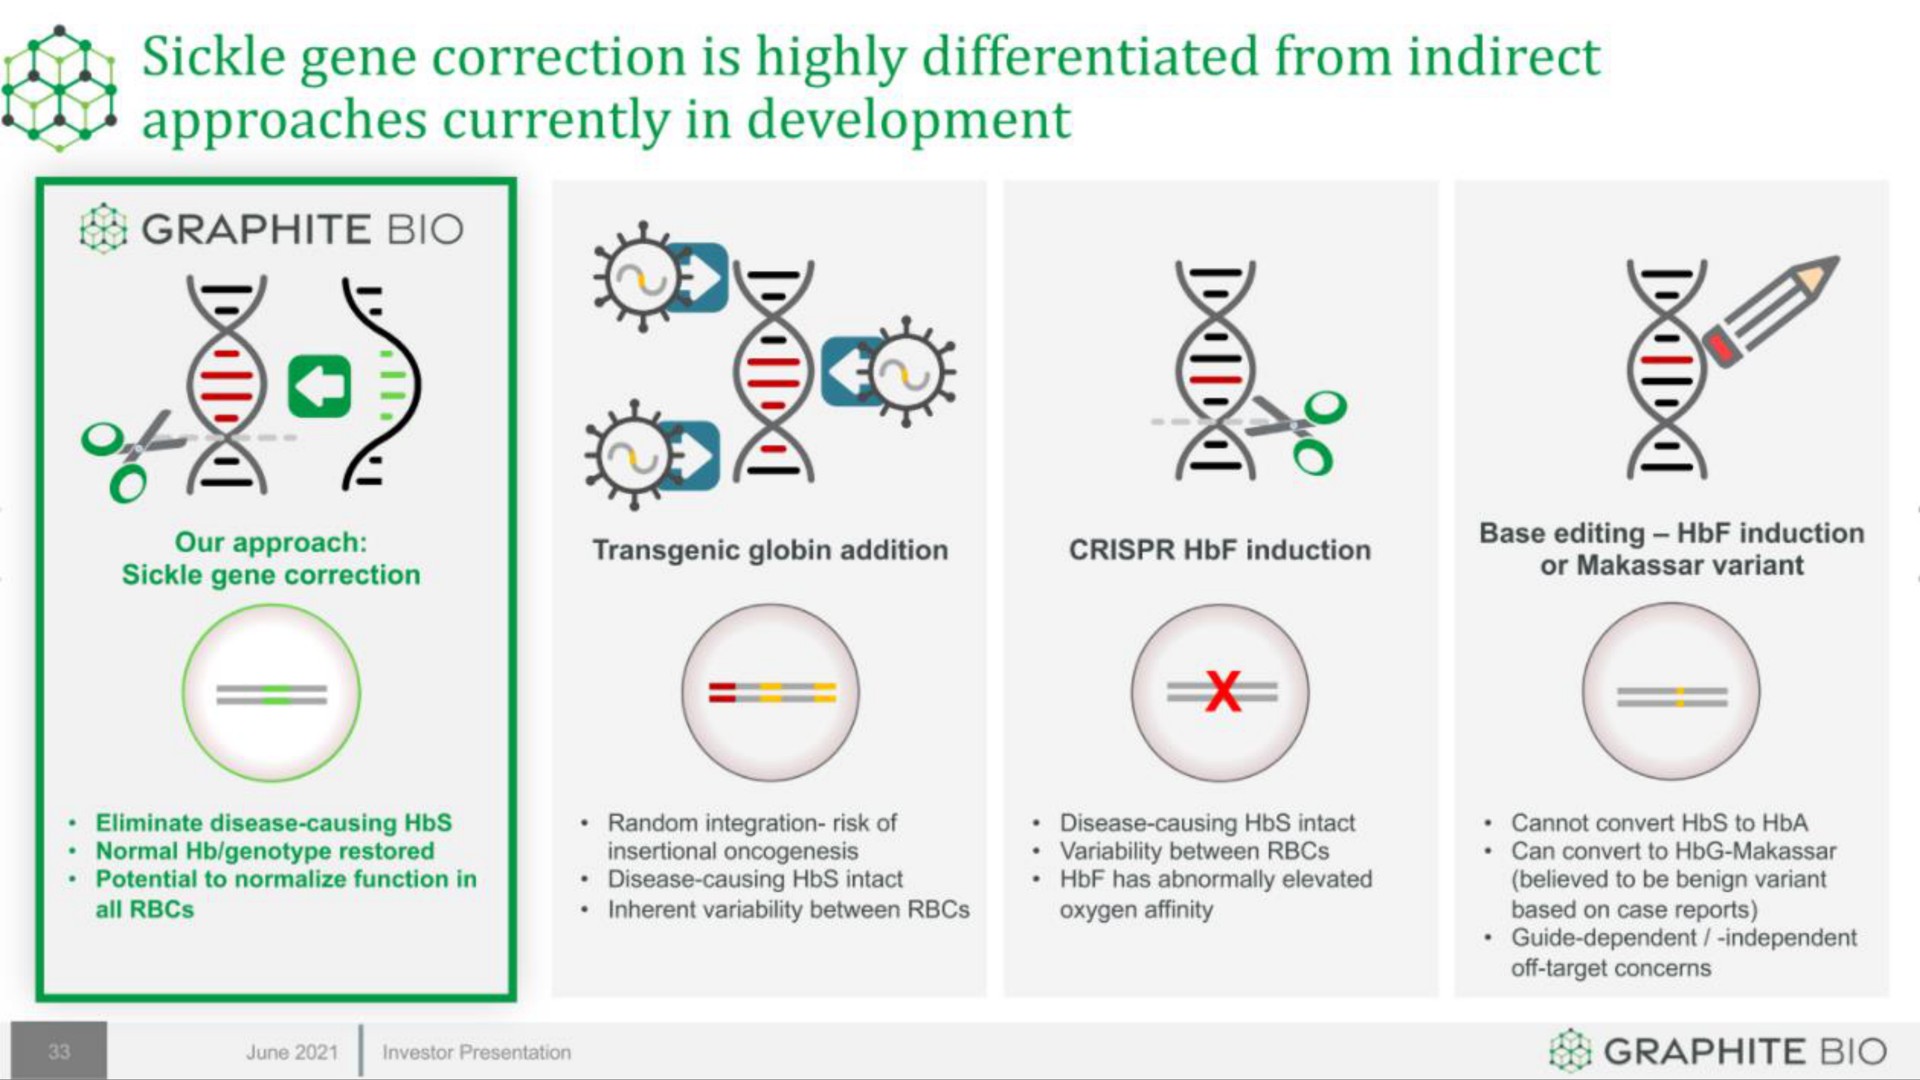 sickle gene correction is highly differentiated from indirect nay approaches currently in development so | Graphite Bio